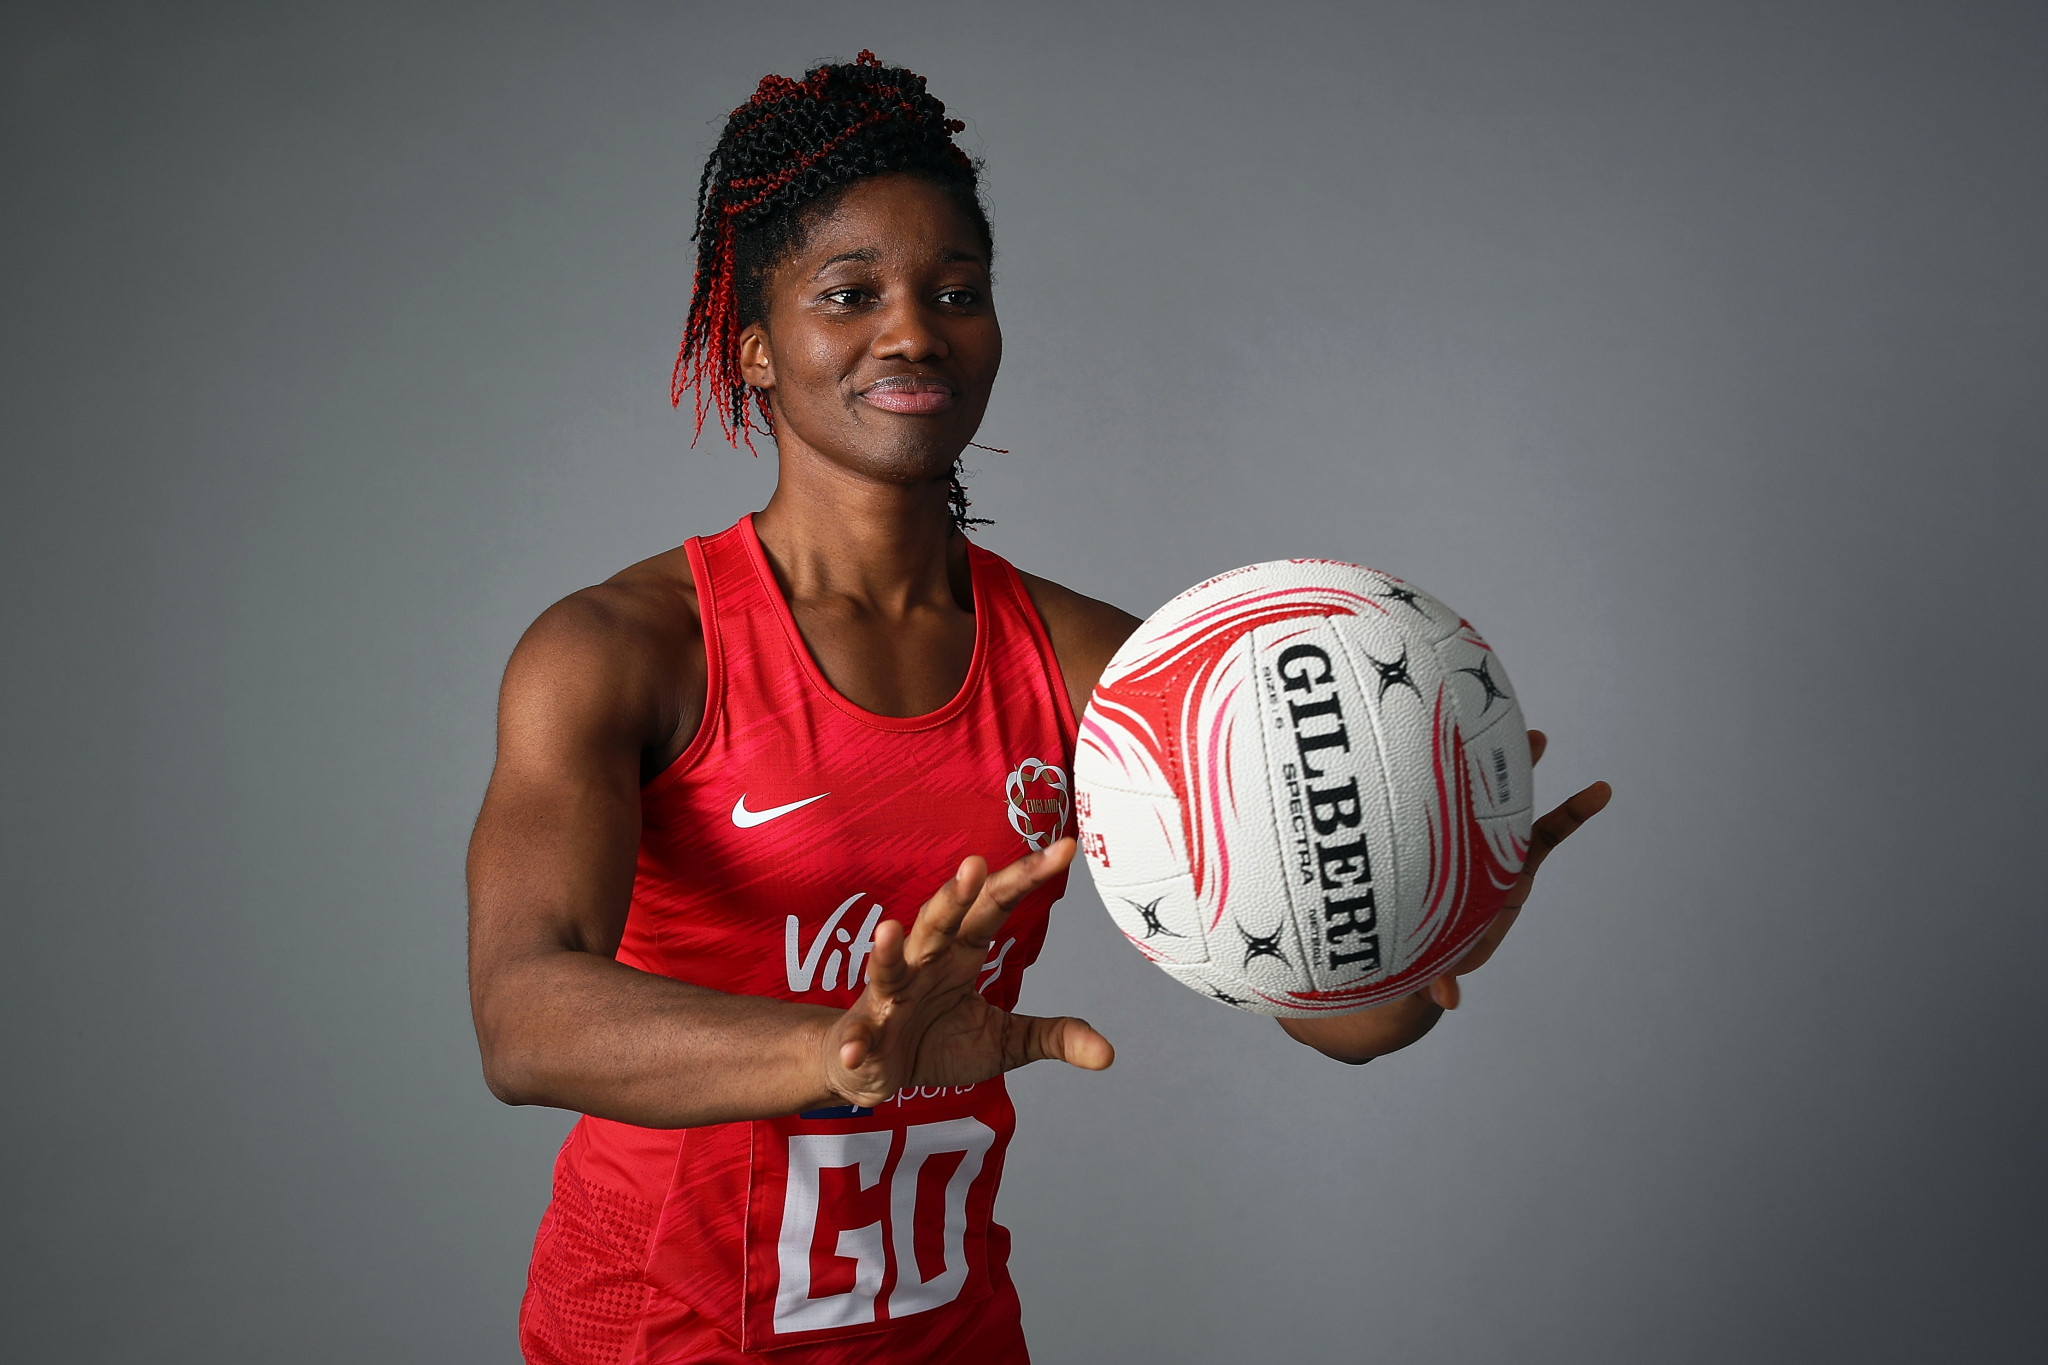 England Netball's Commonwealth Games-winning captain Ama Agbeze was awarded an MBE in the Queen's Birthday Honours List ©Getty Images